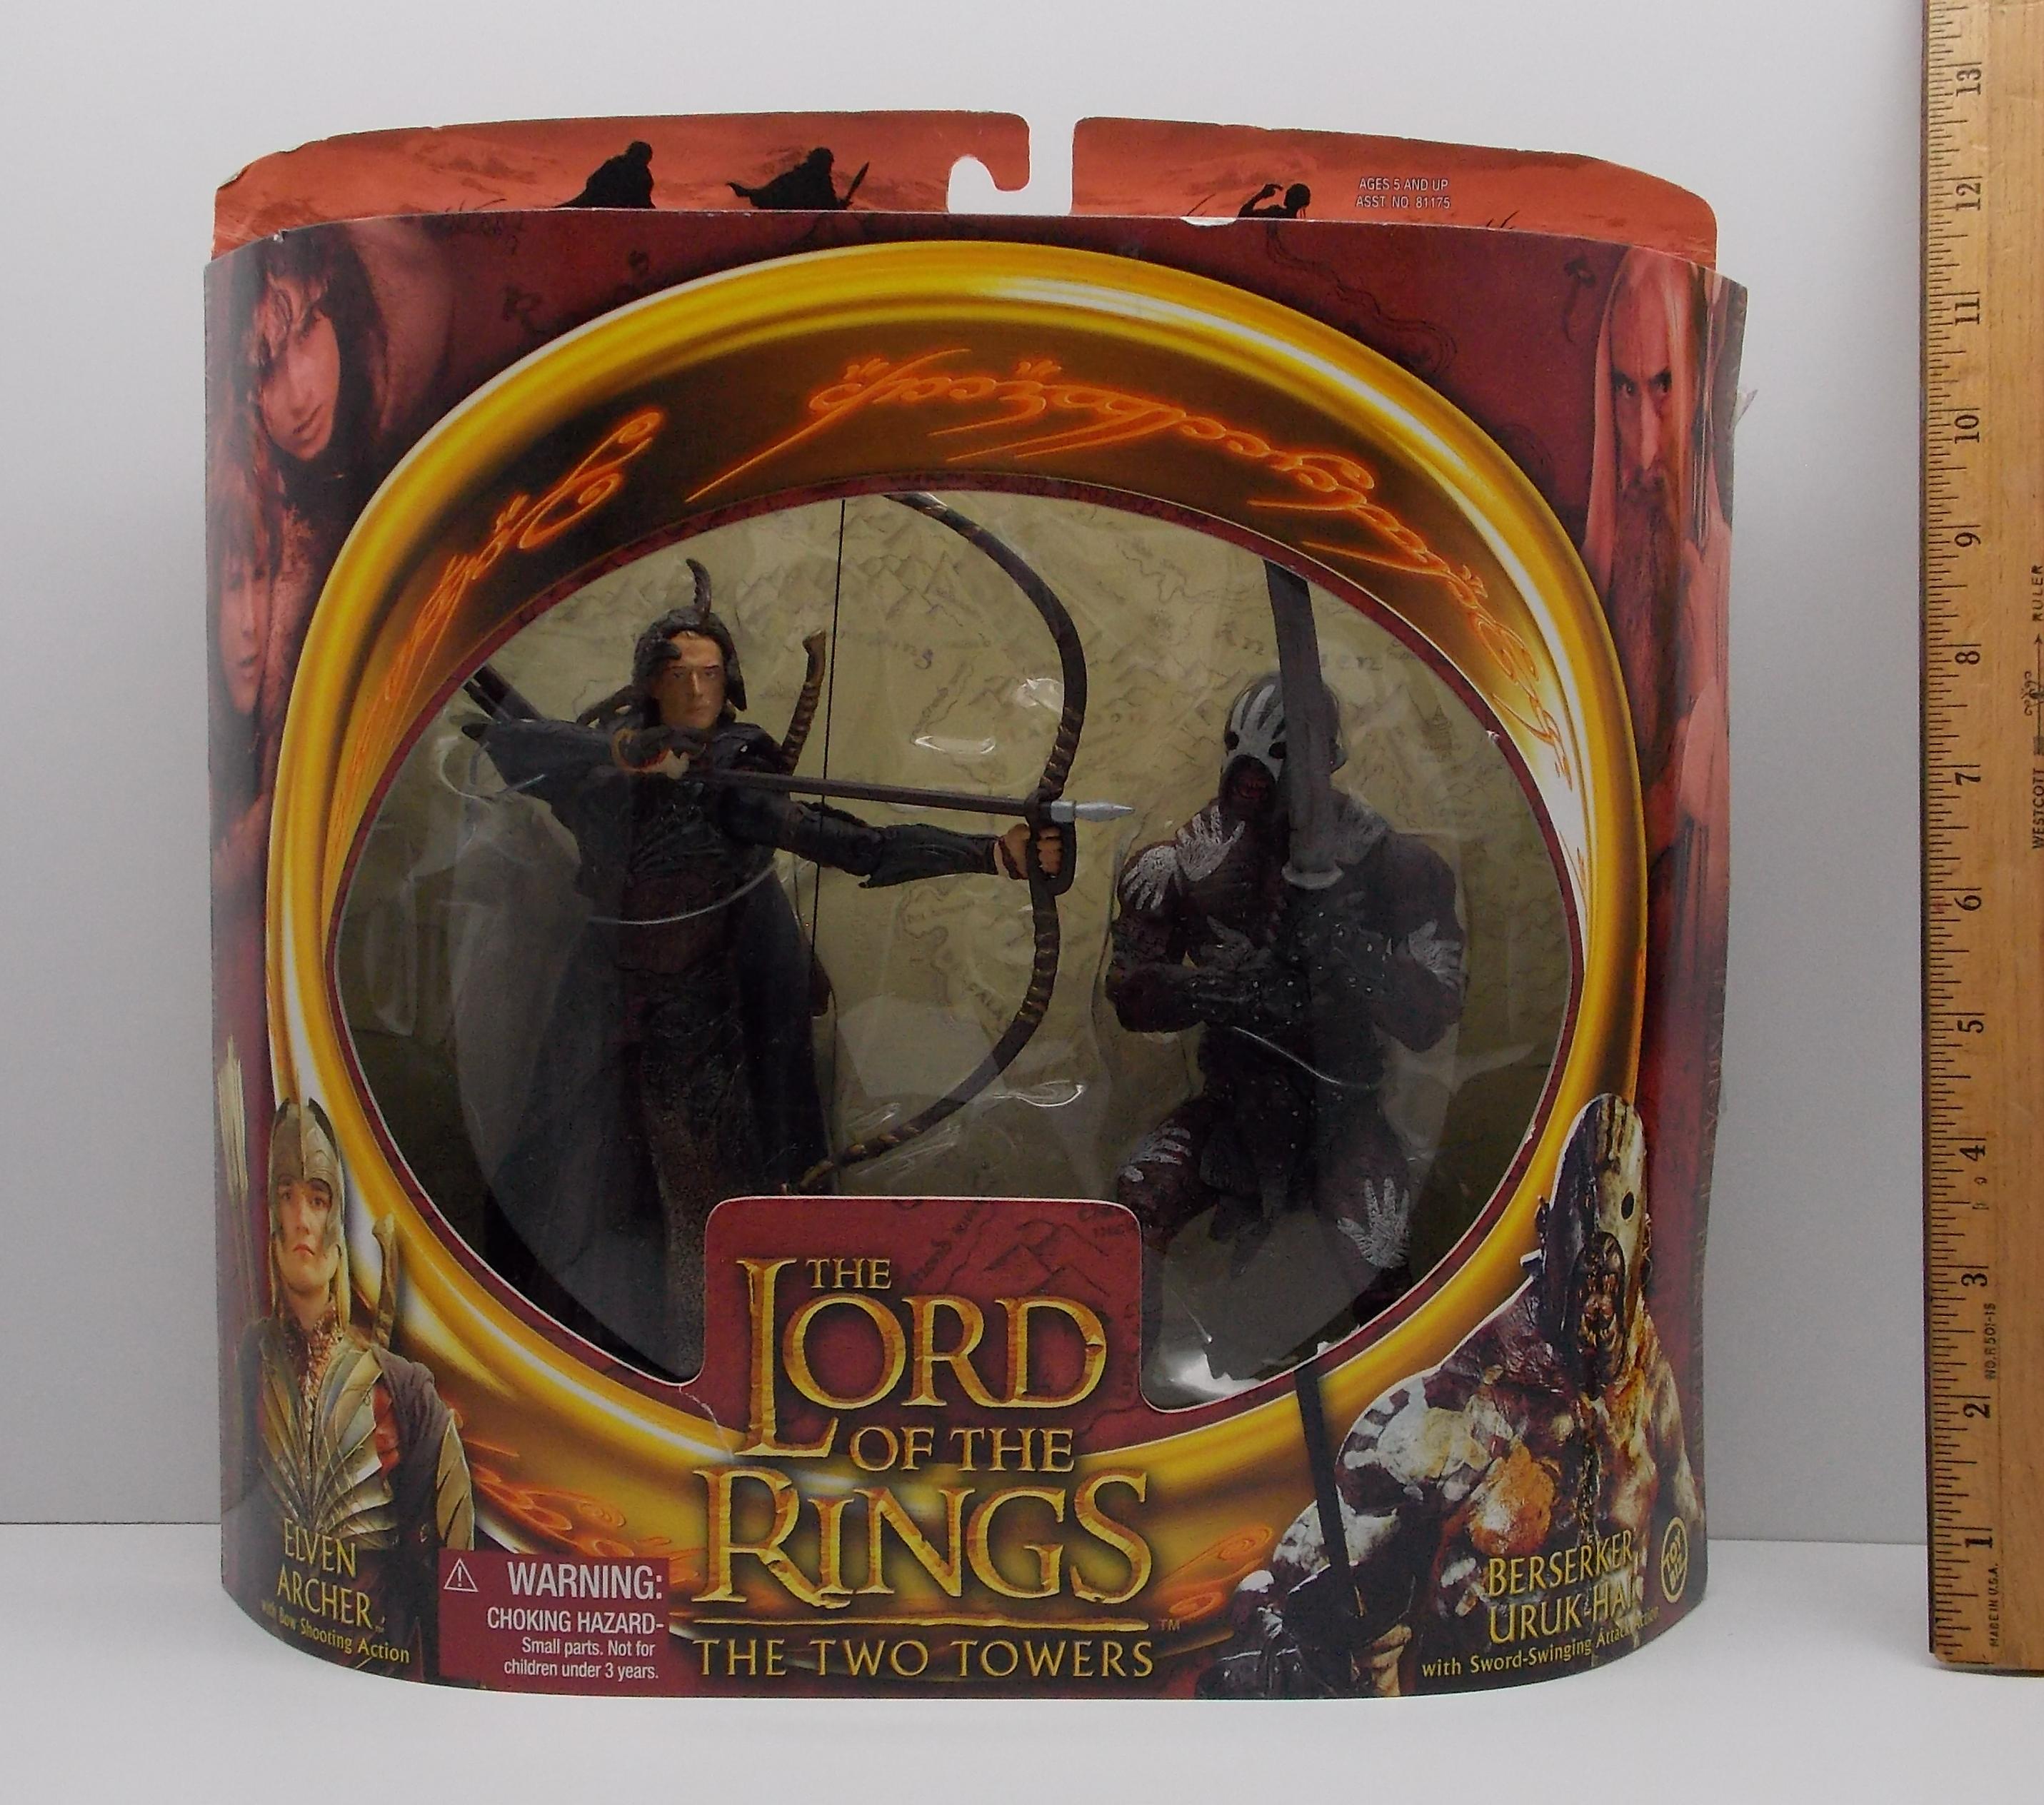 Elven Archer/Berserker Uruk-Hai 3 Figure Lord of the Rings Action Exclusive Boxed Set